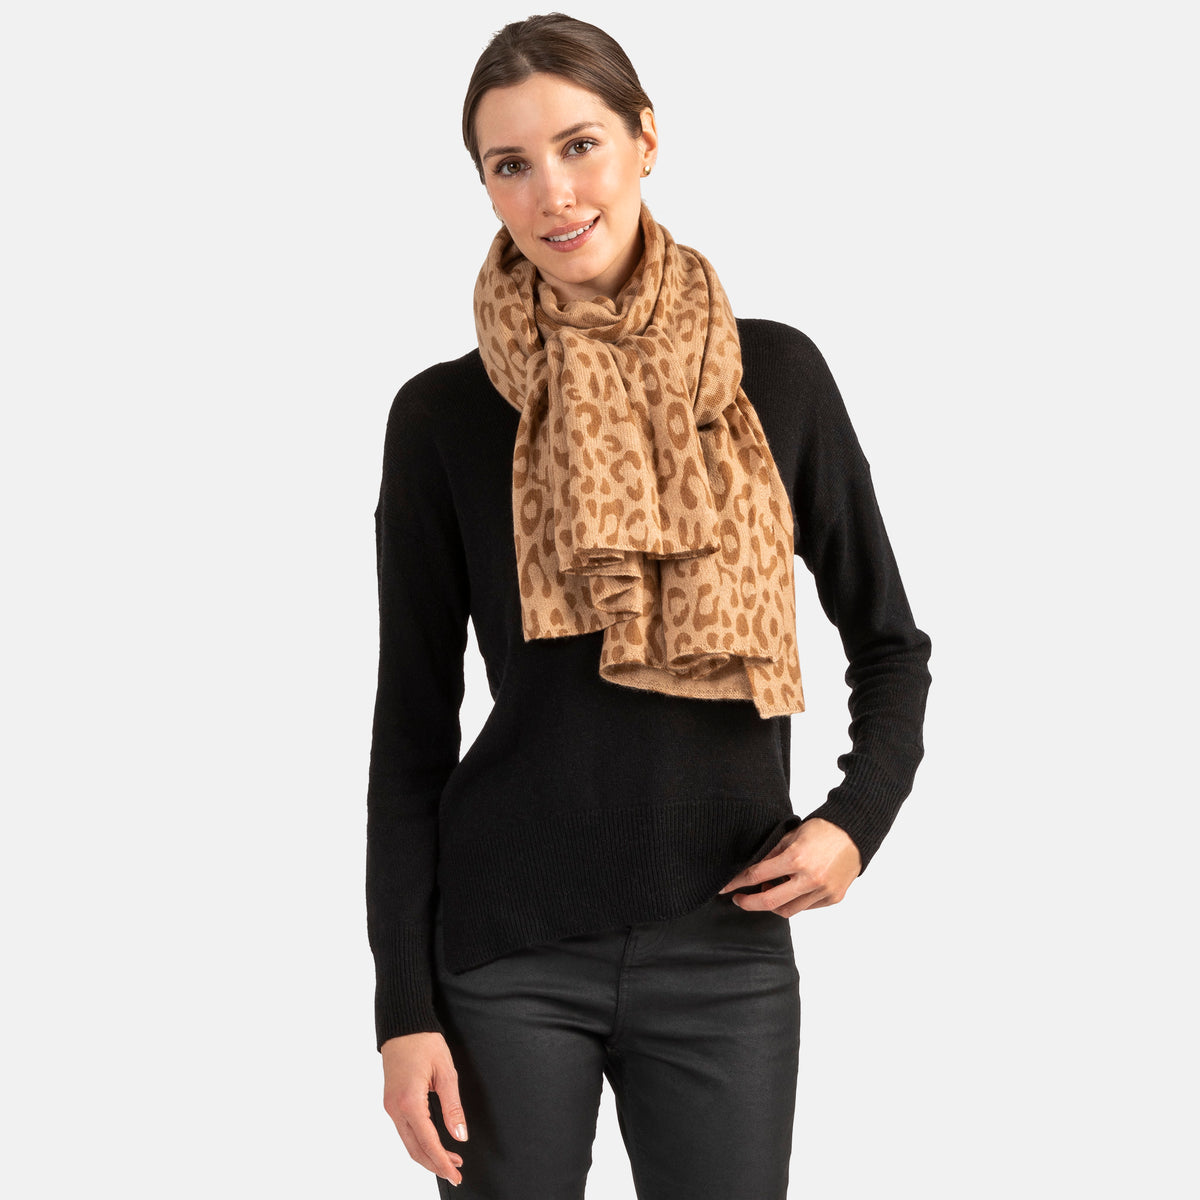 Picture of a woman wearing an oversized knitted cashmere travel wrap or scarf with a cheetah pattern in greycream and tan tones. tones.